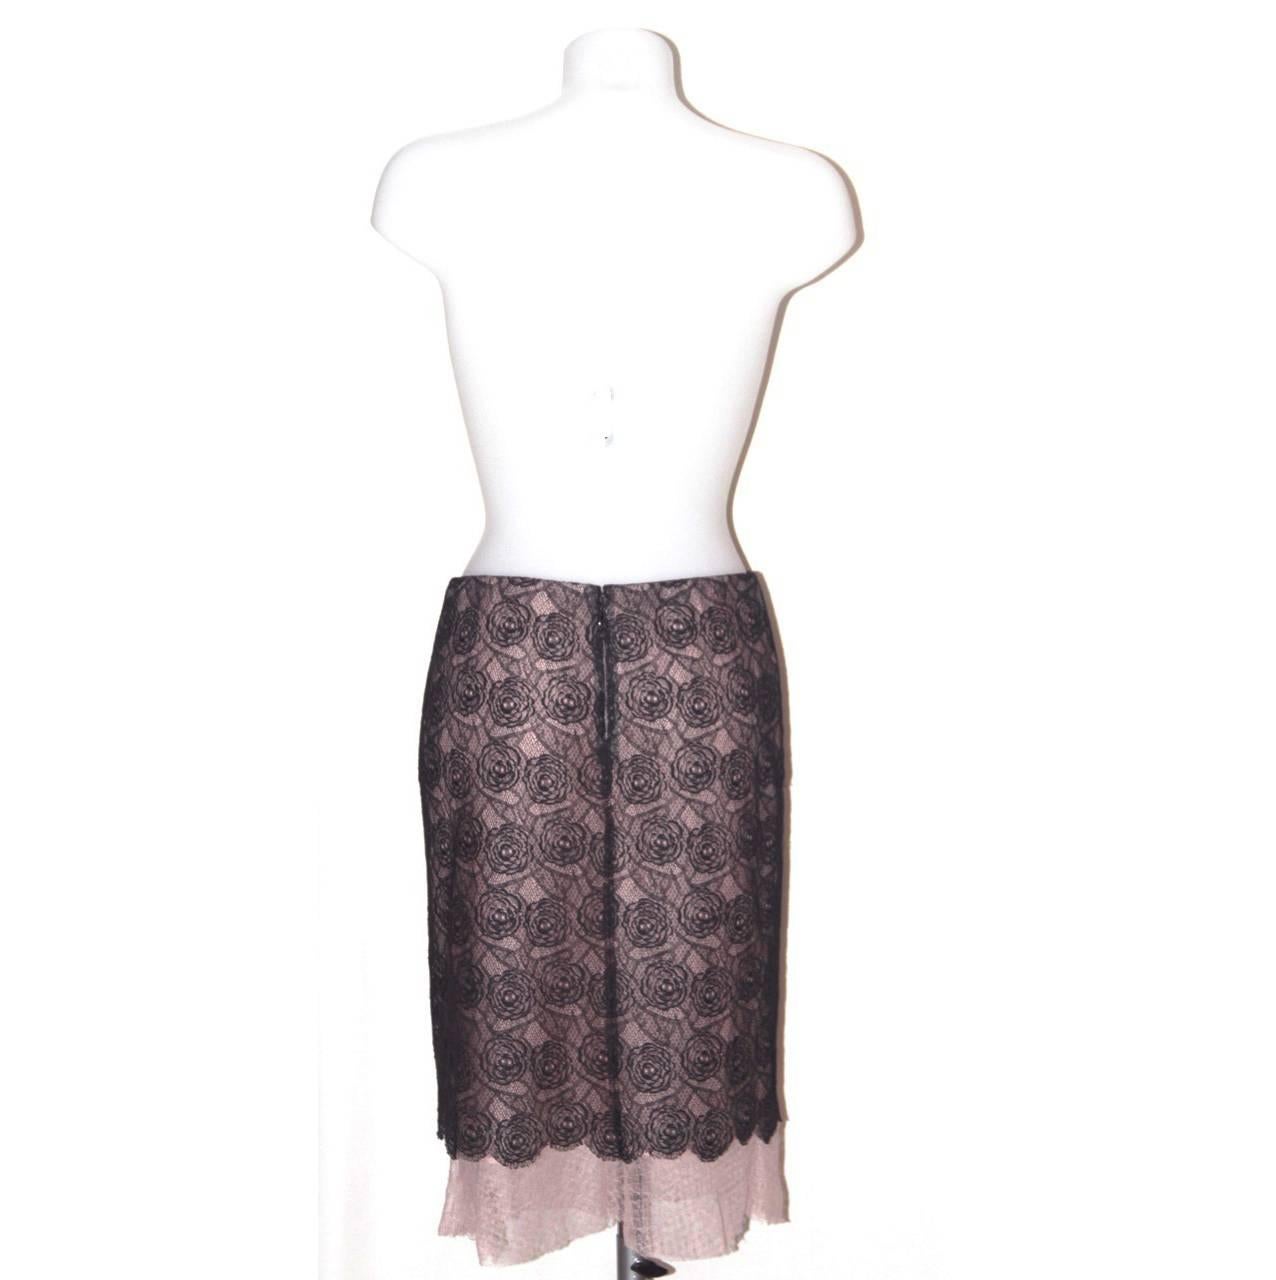 Both delicate and sophisticated, this skirt from Chanel is a must-have for a romantic look. 

Collection: Spring 03
Fabric: Lace: cotton blend; Under dress: polyamide; Lining: silk
Color: Blush pink, black
Size: FR 38 
Measurements: Lenght: 60